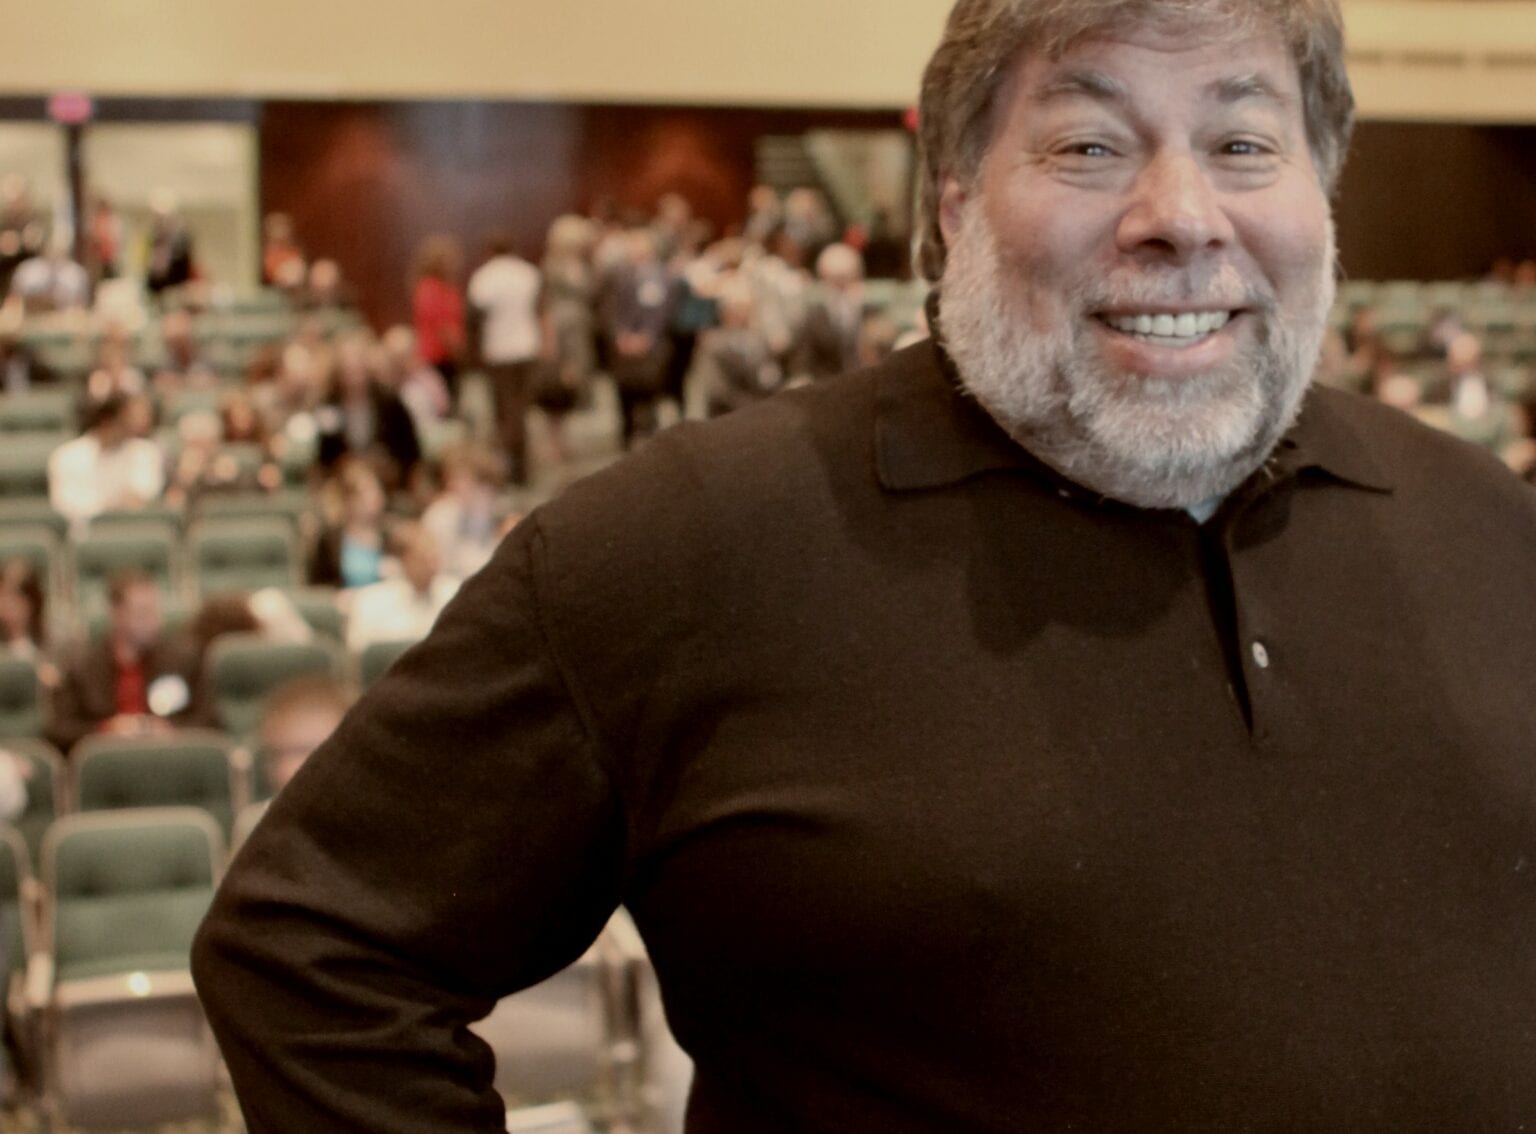 A lack of respect for the Apple II leads to Steve Wozniak's departure from the company he founded.